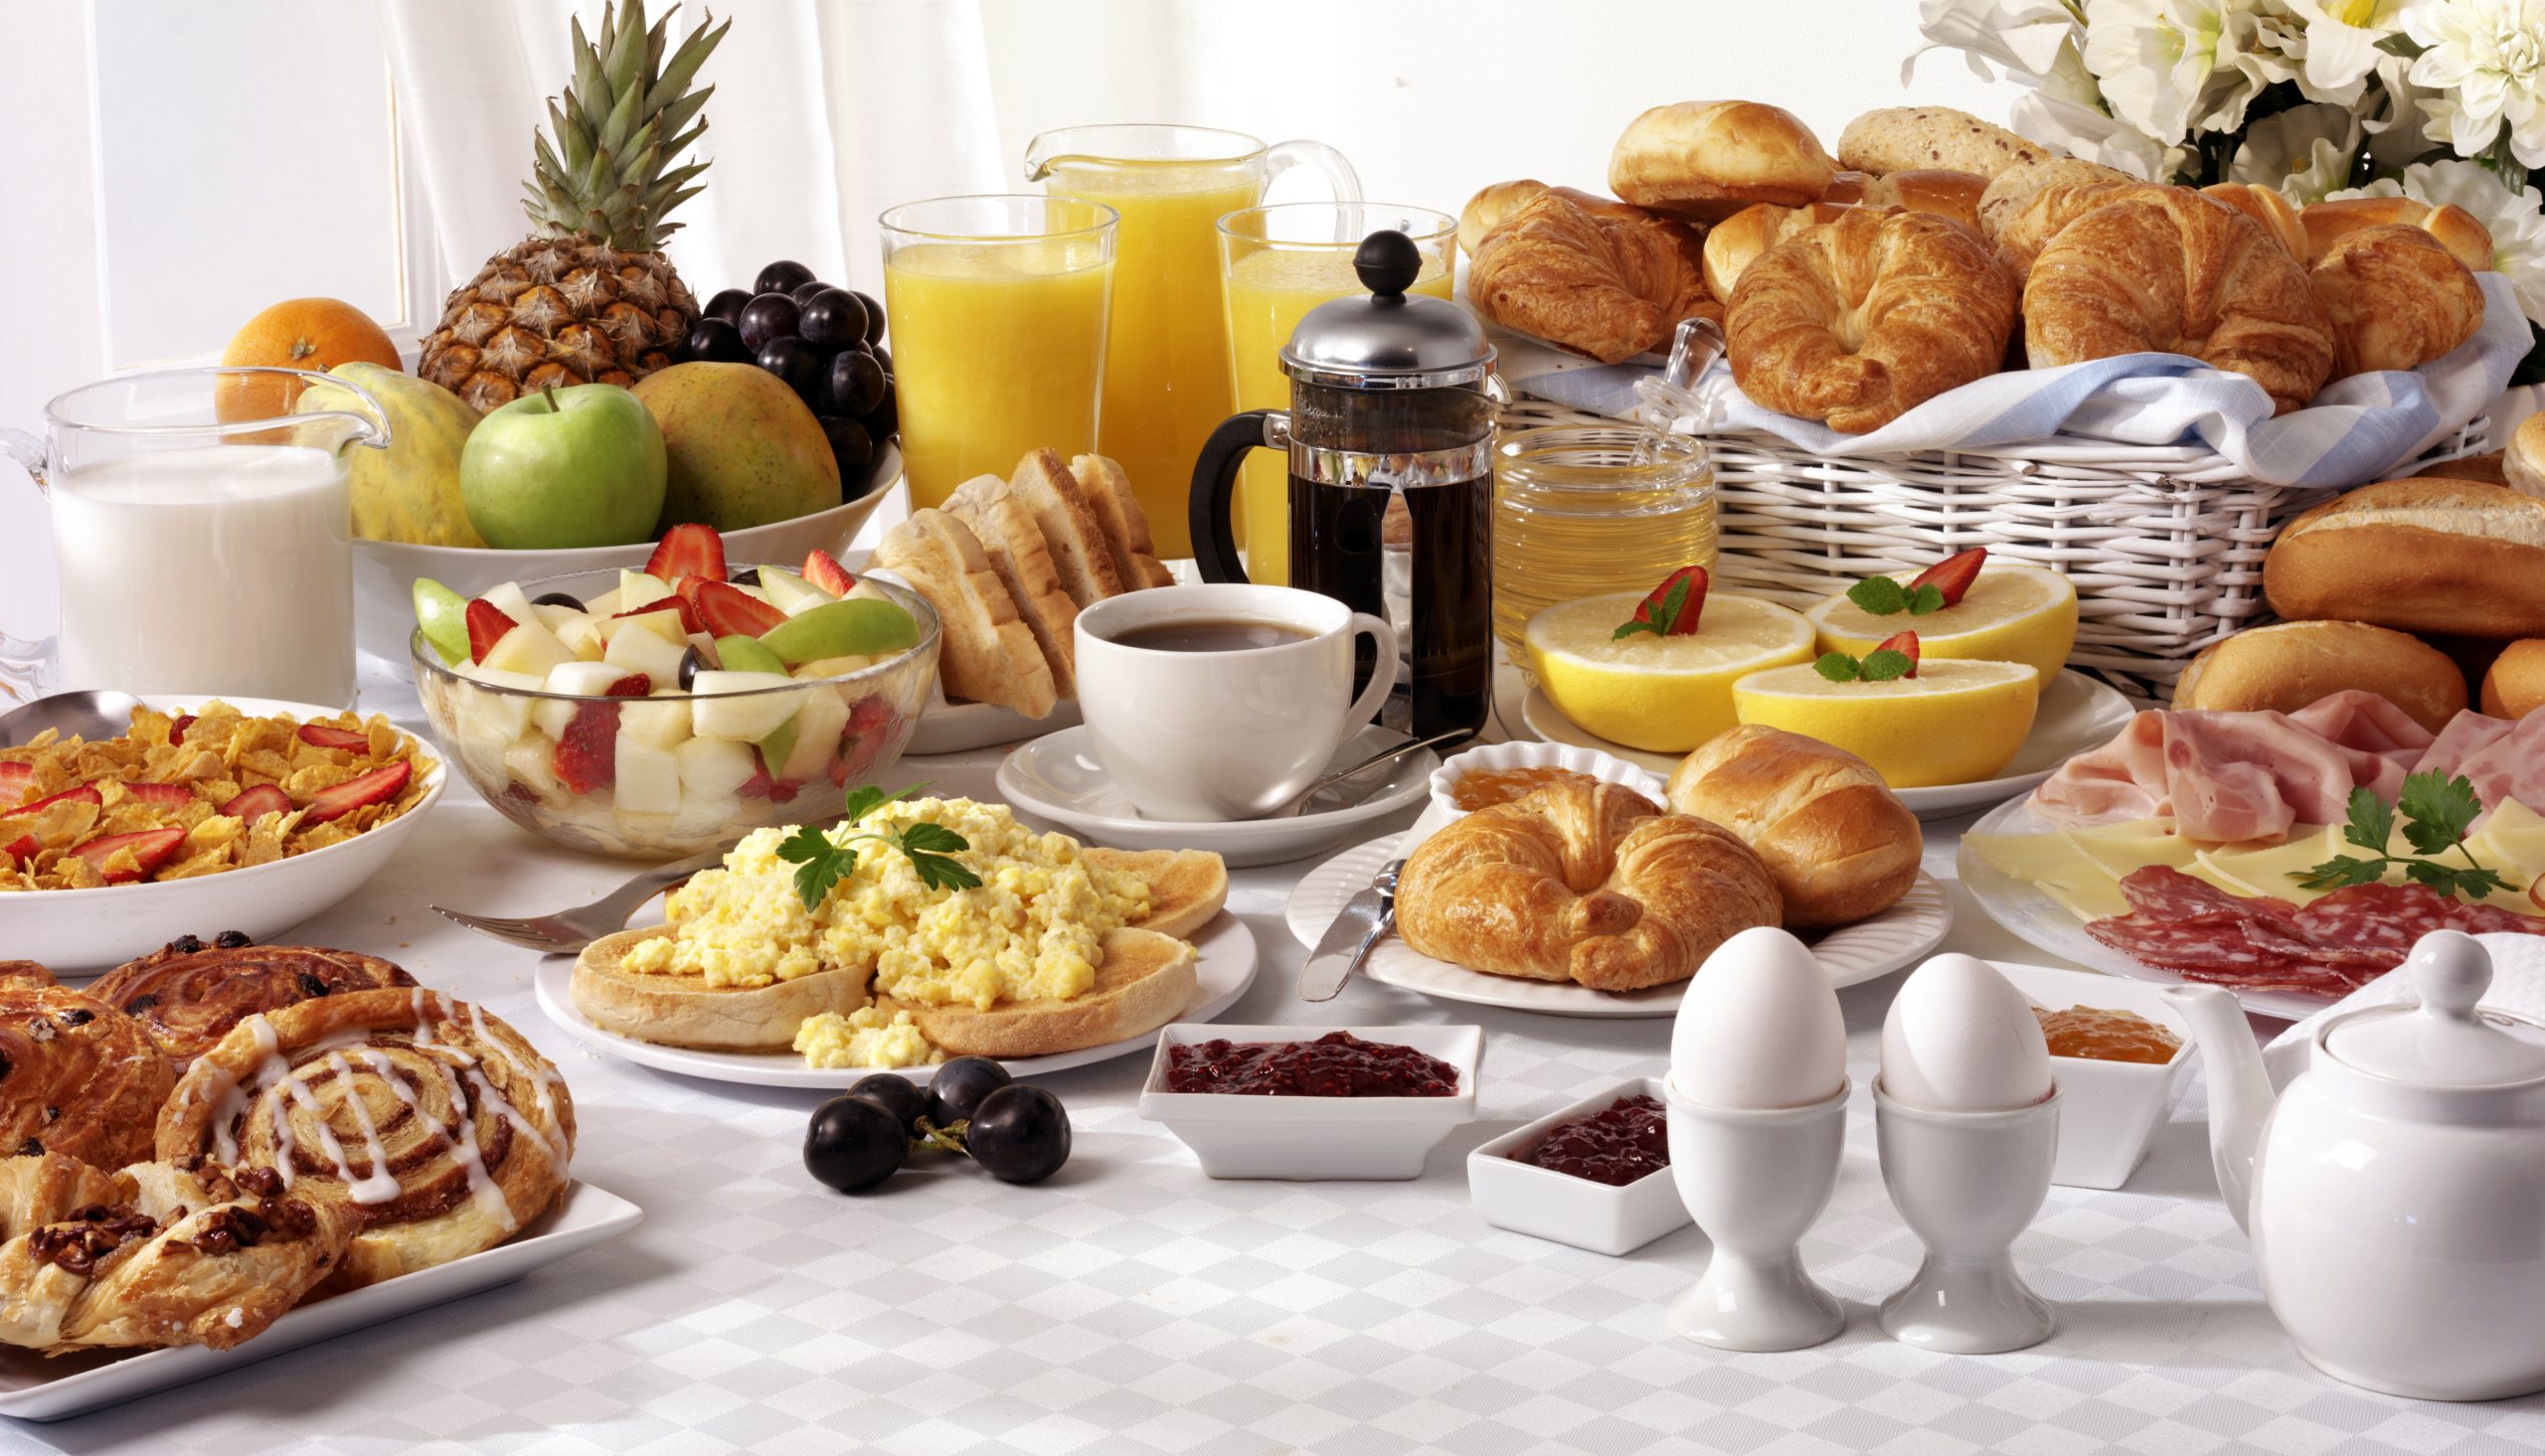 Breakfast,Buffet,Table,Filled,With,Assorted,Foods,savoury,sweet,pastries,hot,And,Cold,Drinks